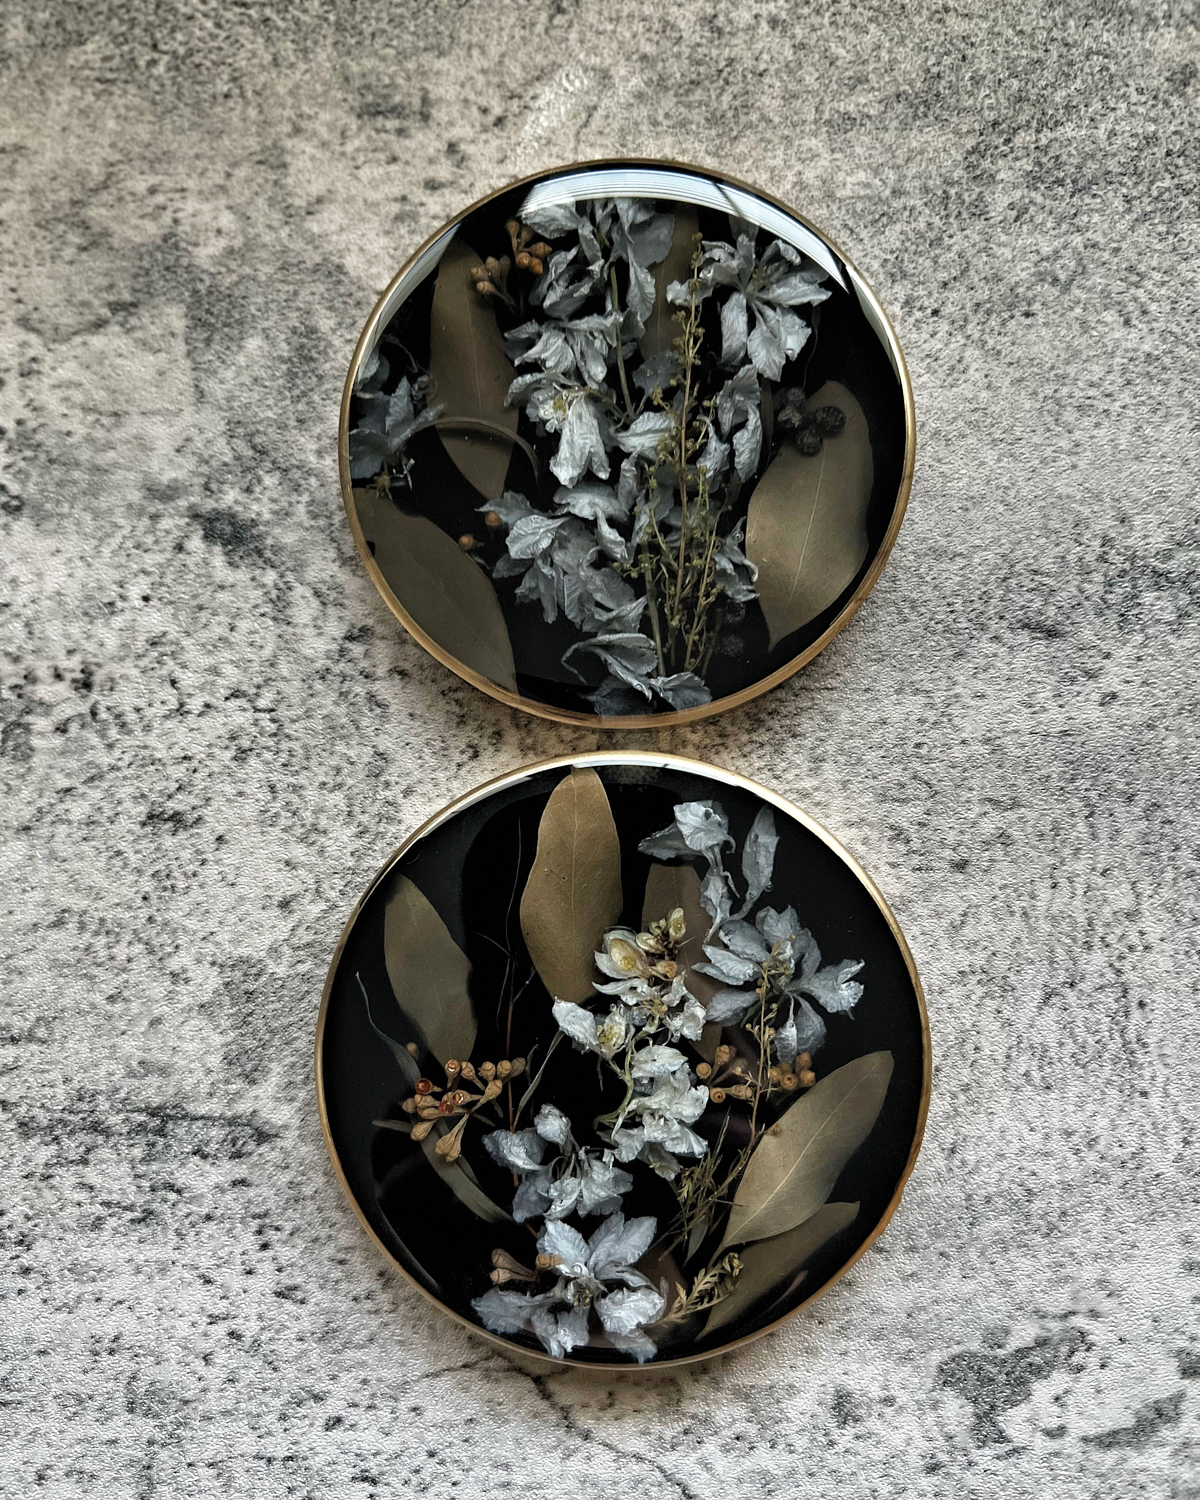 Two circular floral art pieces set in resin by Marie's Floral Art